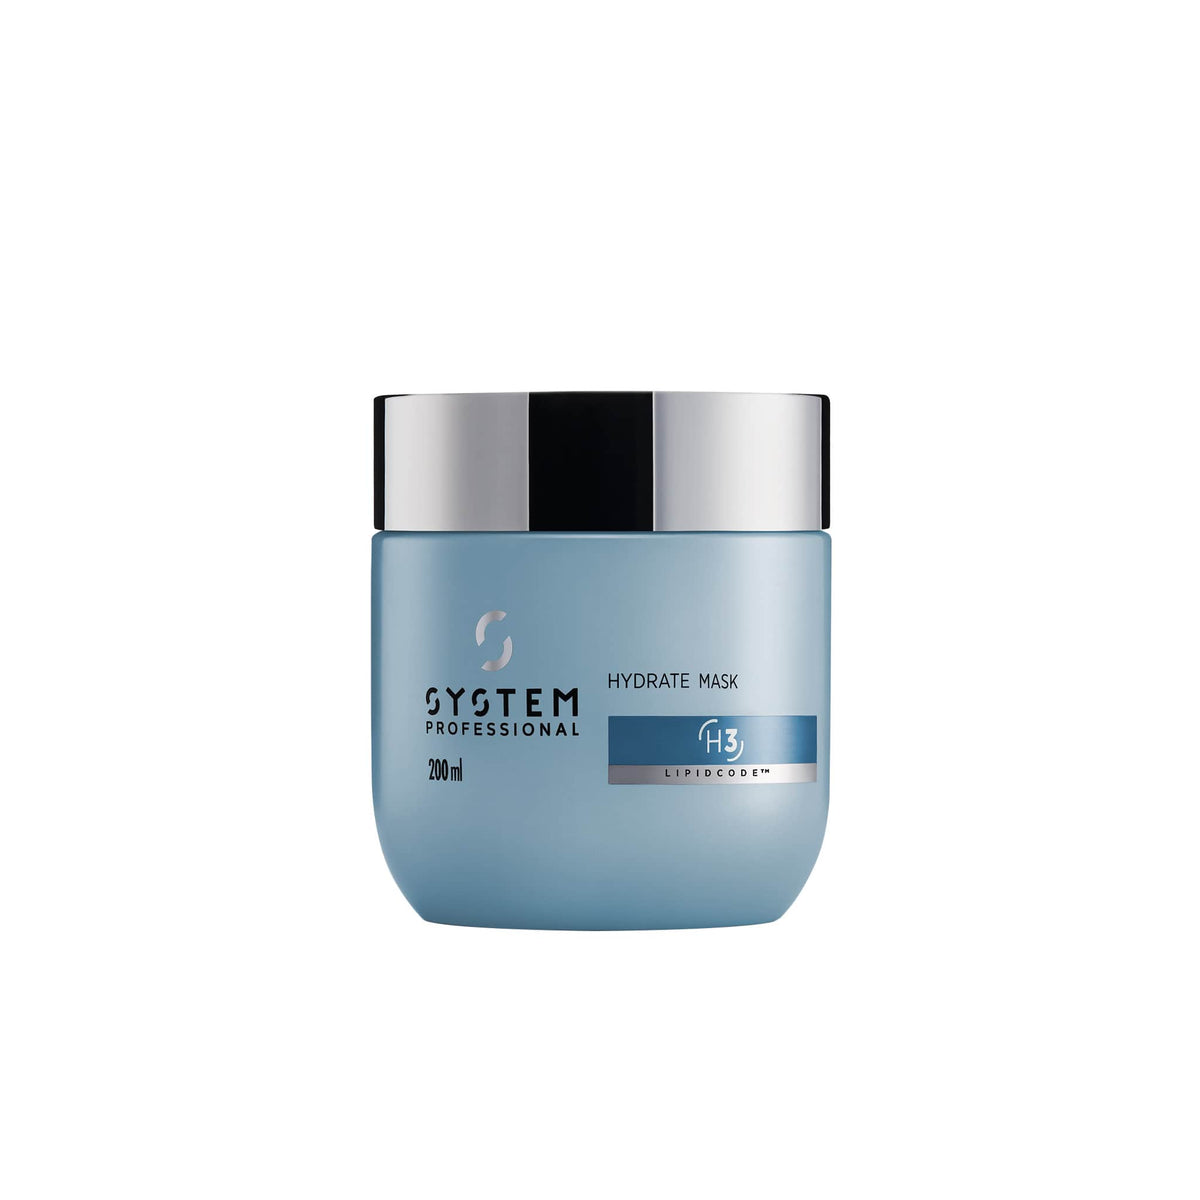 System Professional Hydrate Mask - Shop online | Retail Box